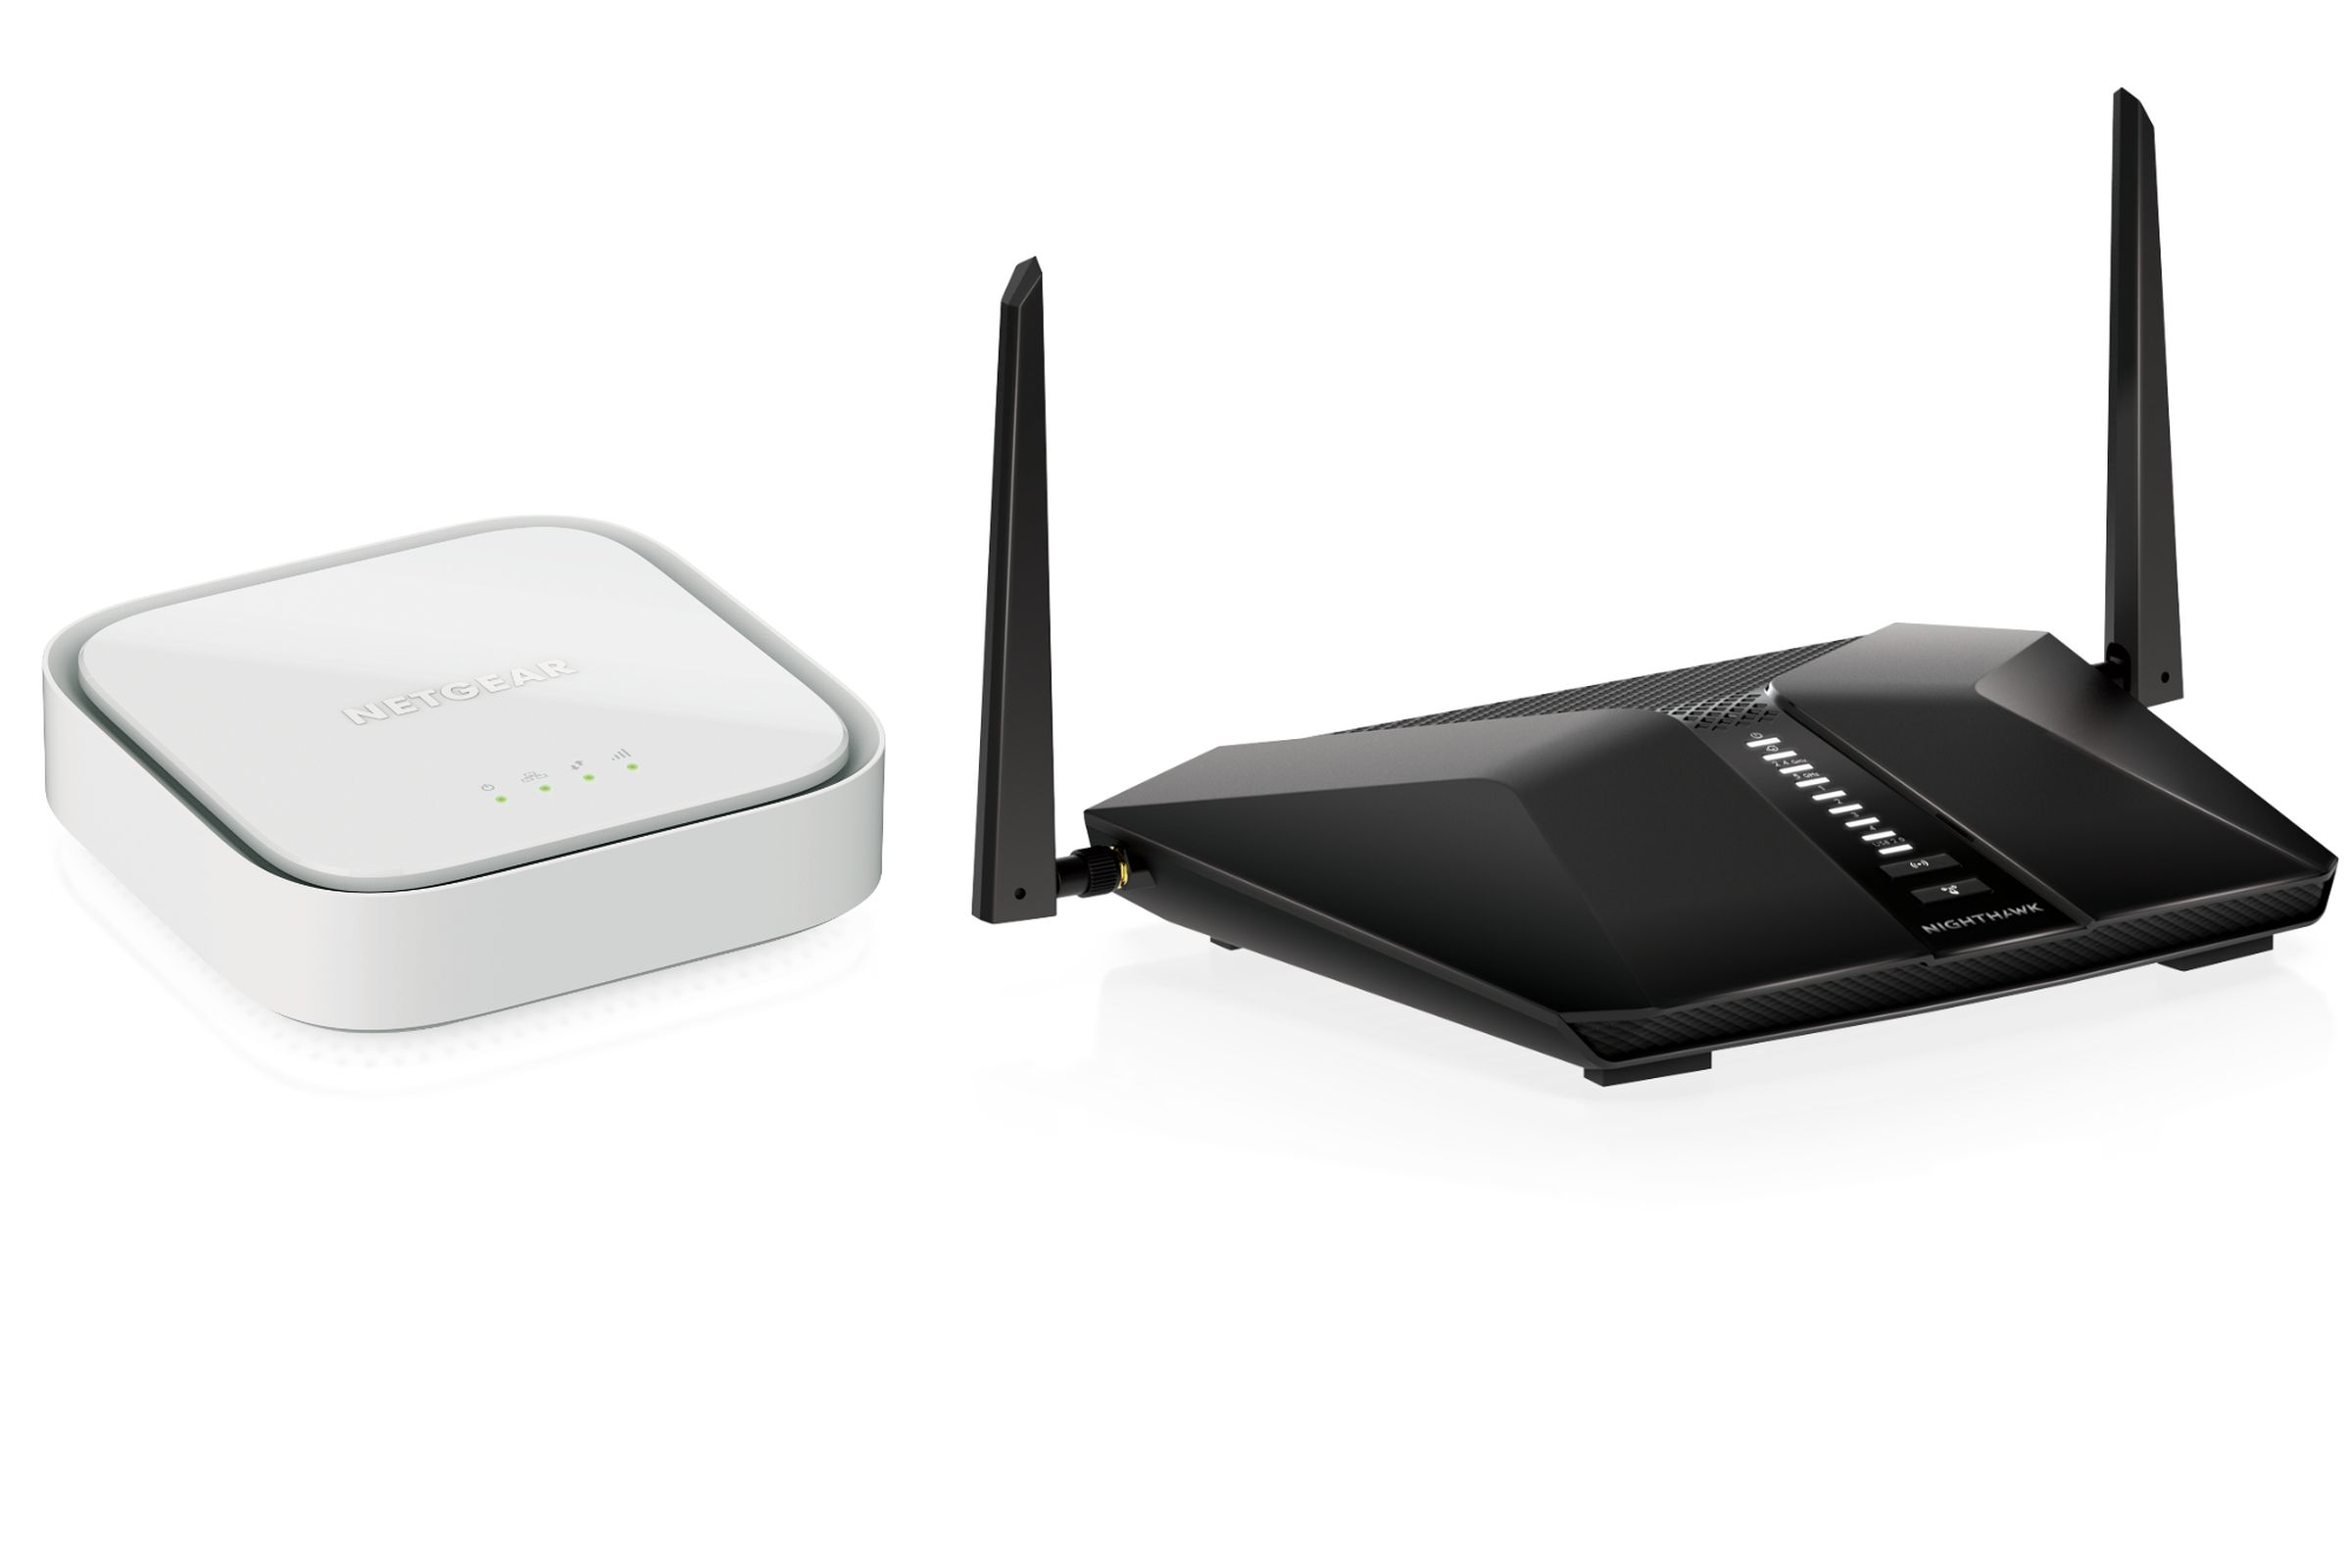 Netgear LM1200 and LAX20 routers